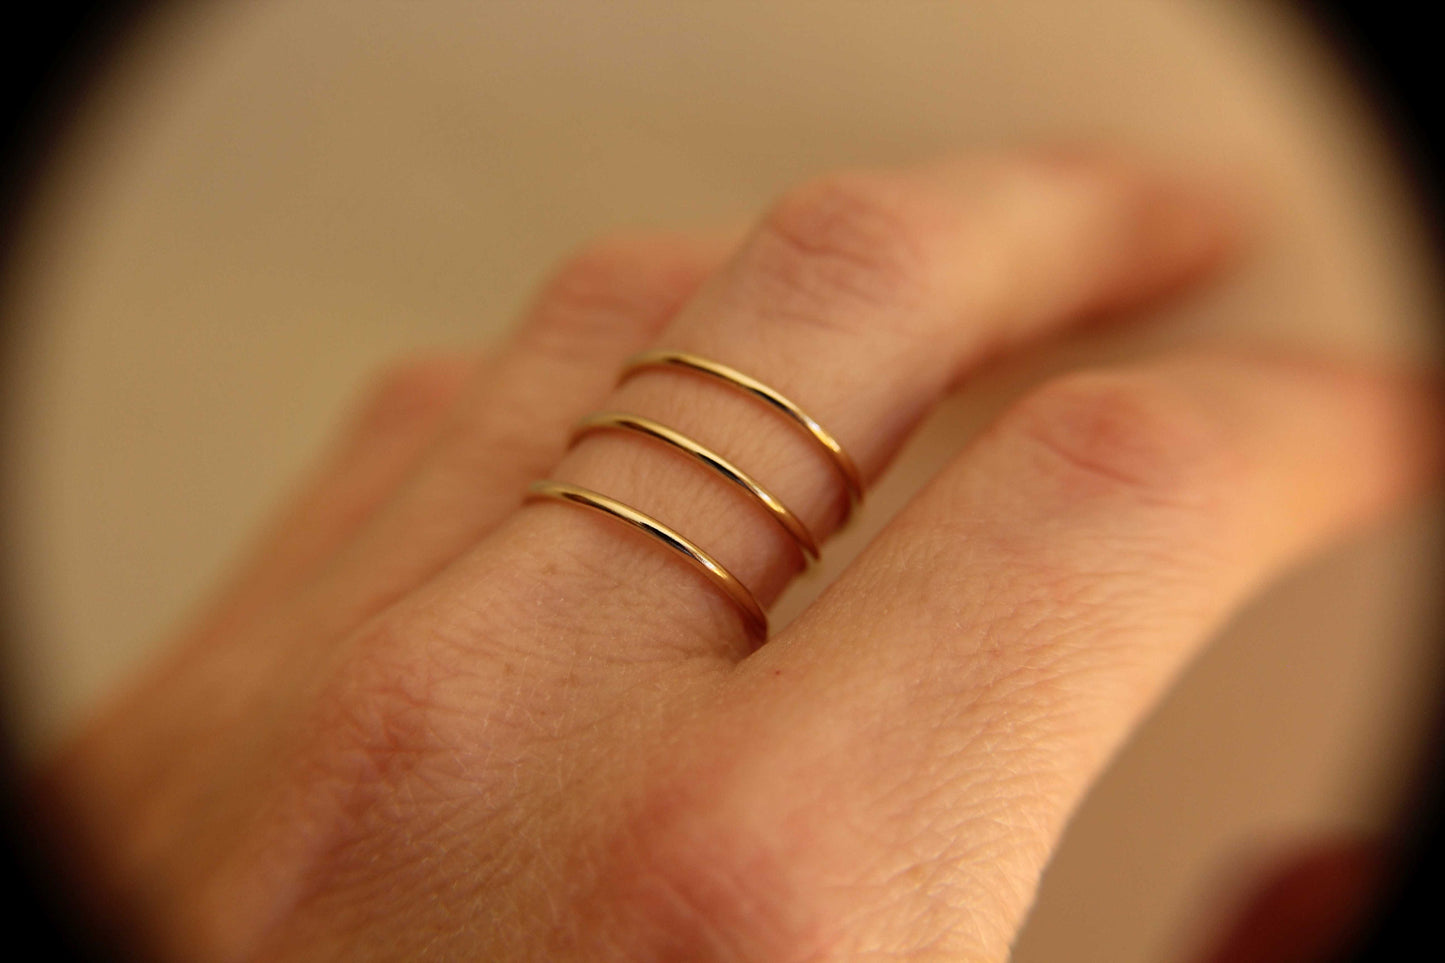 Bypass Thumb Ring, Coil Ring, Spiral Thumb Ring, Wrap Around Ring, Statement Ring, Bypass Ring, Gold Jewelry, Modern, Wrap Ring, Gift,2